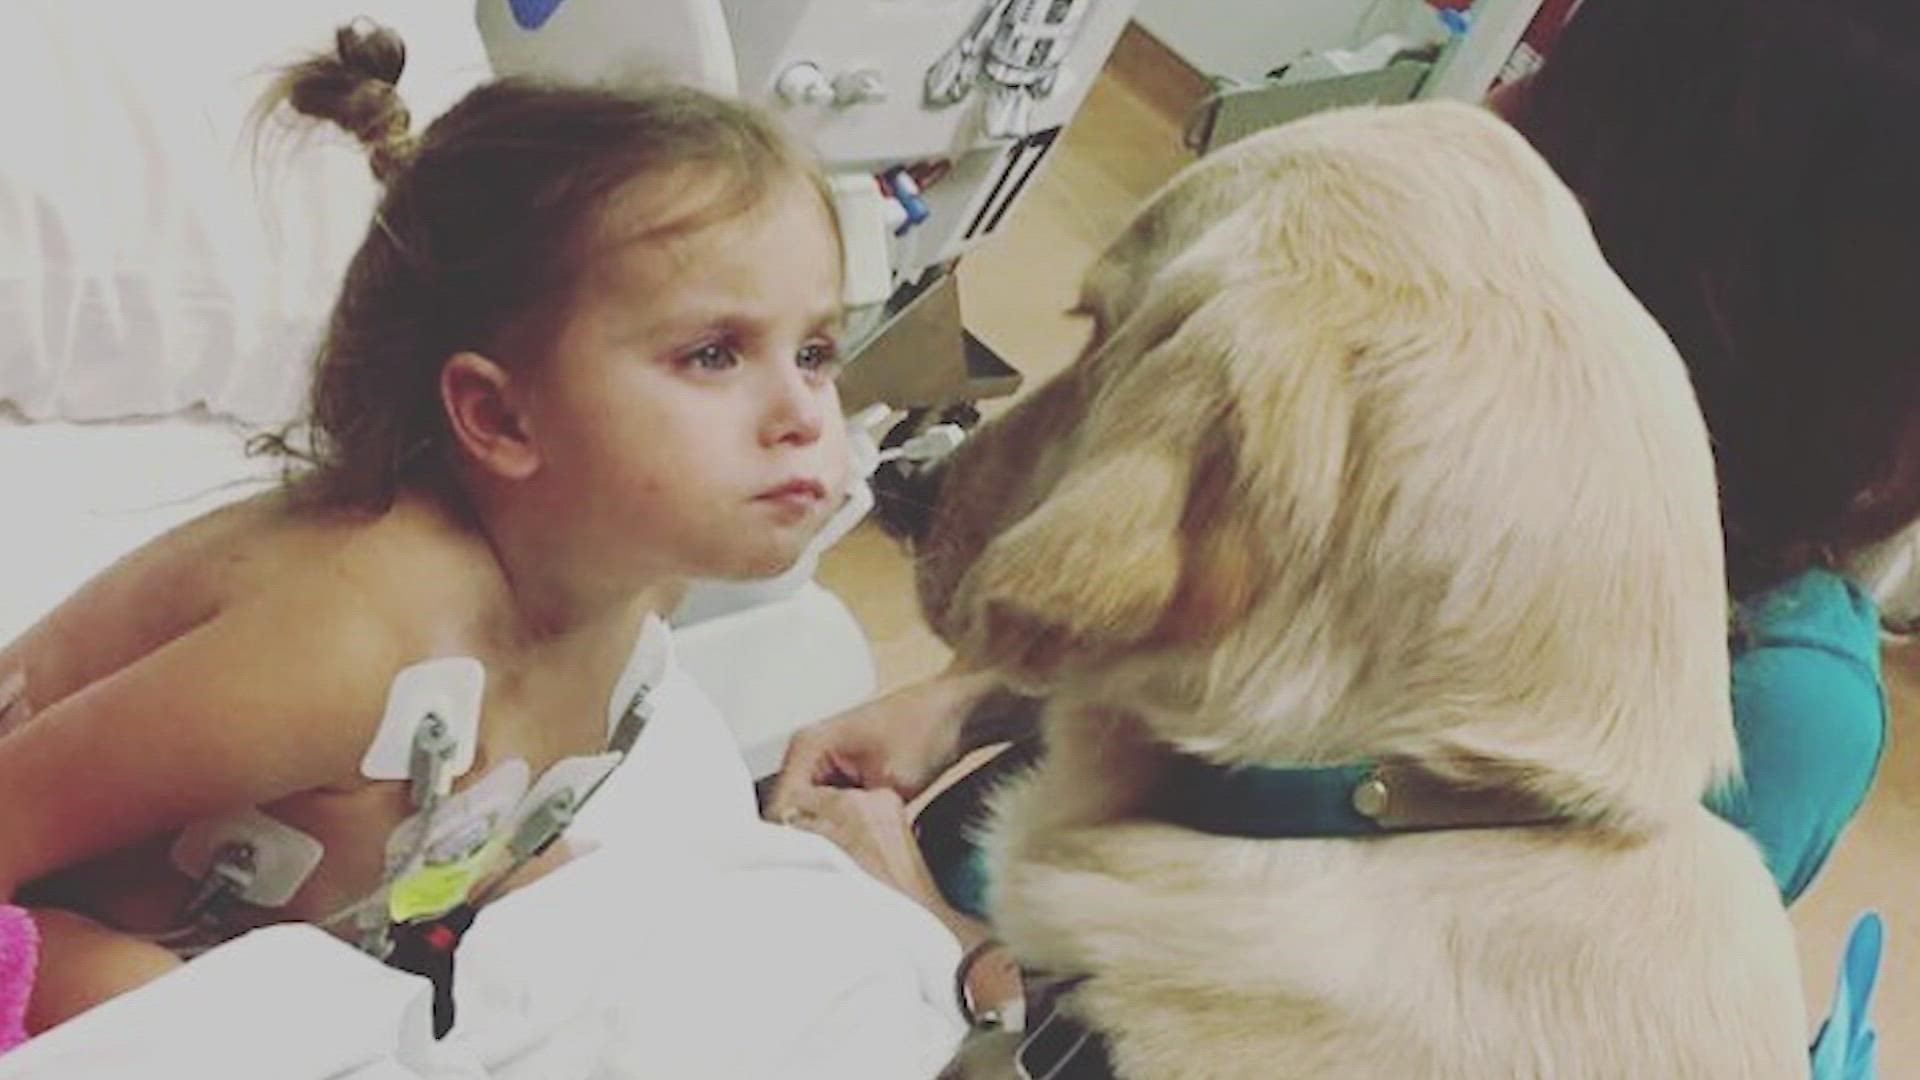 Elsa the golden retriever has been a comforting presence for thousands of kids facing difficult health battles. "She always makes my day better," Christiana told us.